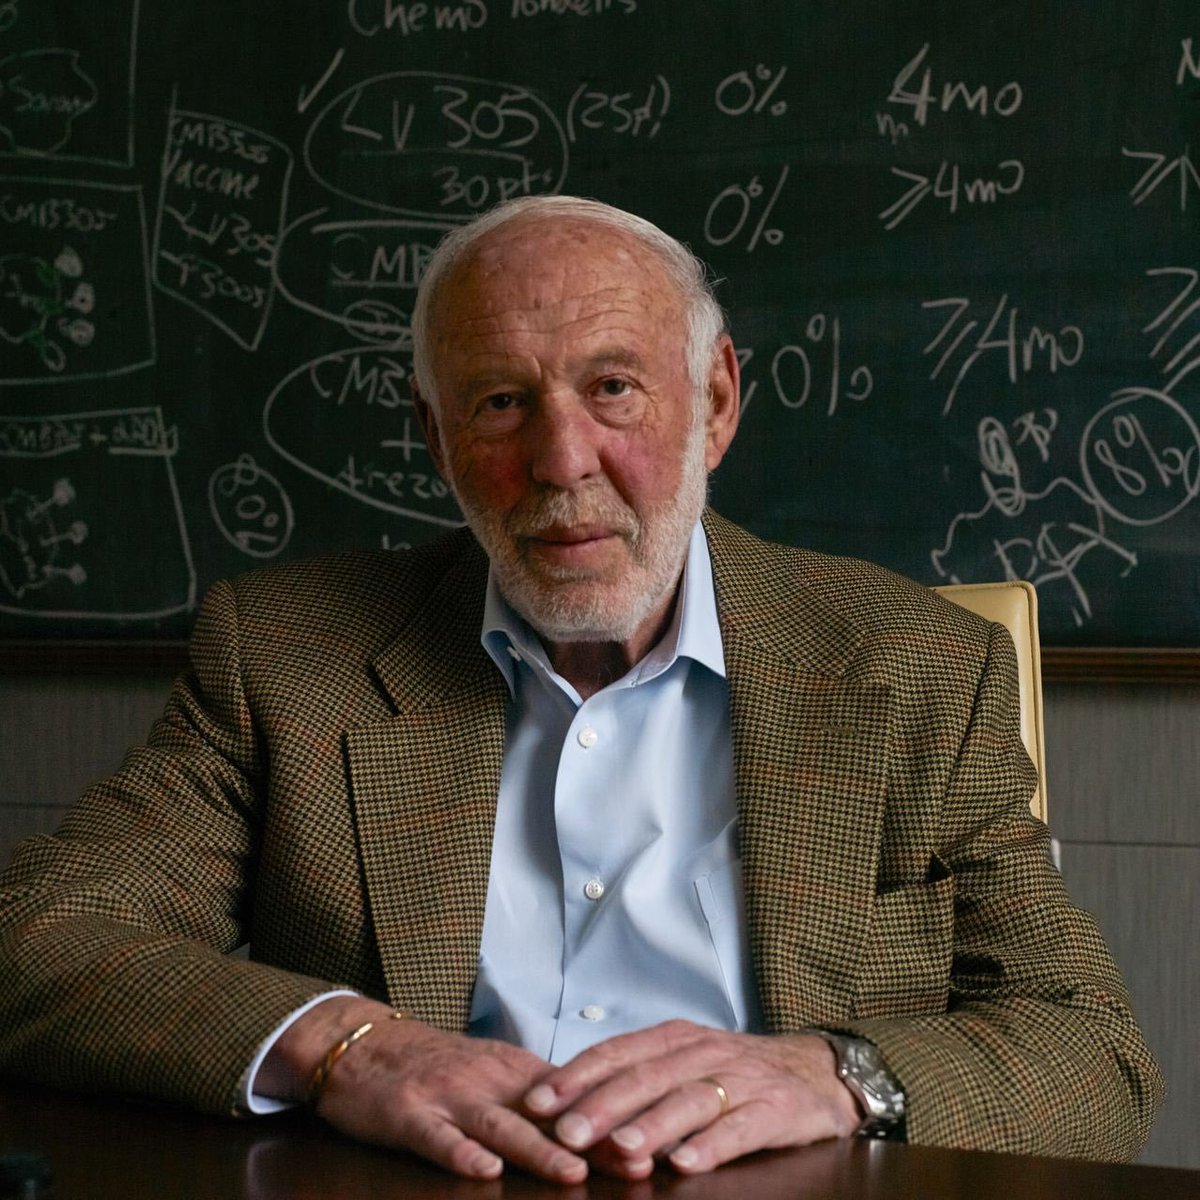 The Fascinating Story of Jim Simons - The Man who solved the markets: